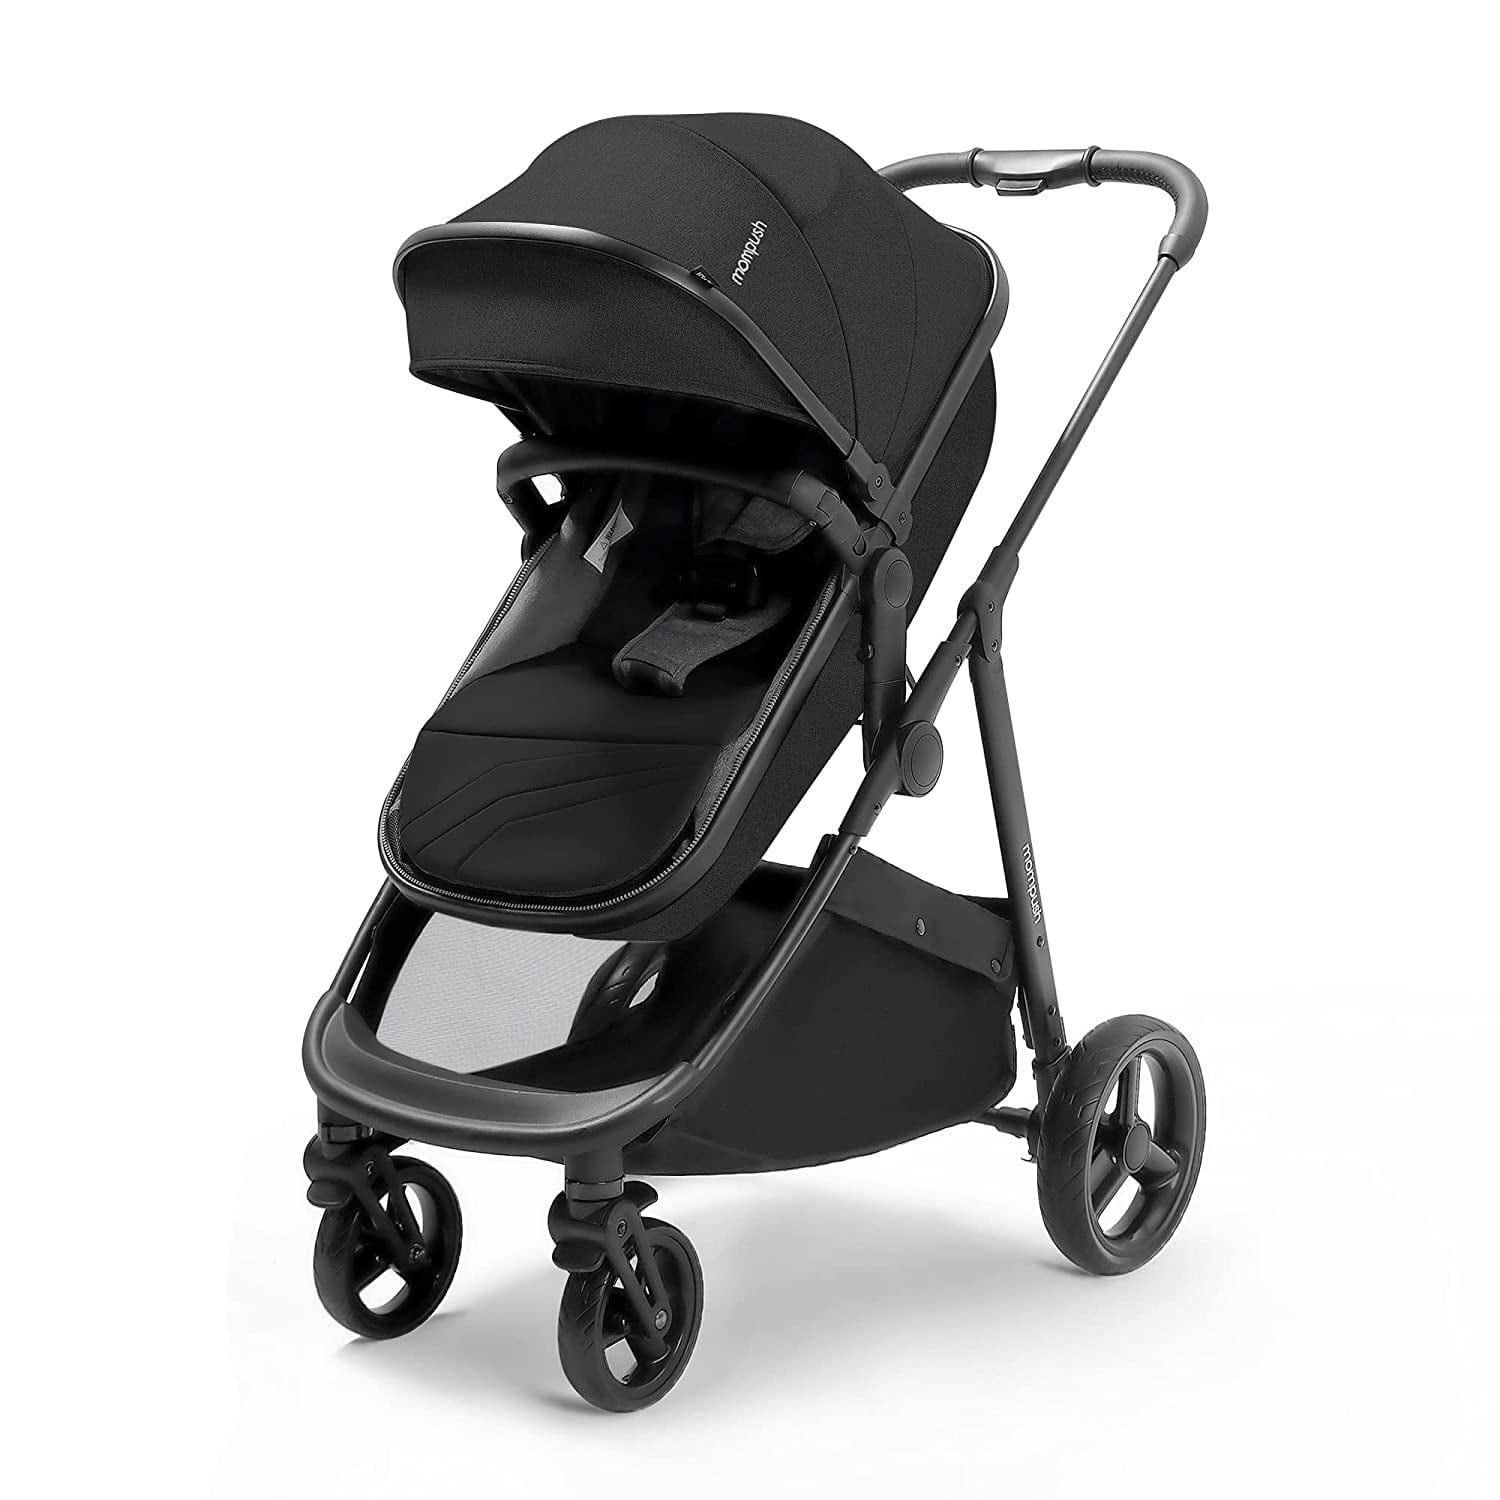 Mompush Wiz Baby Stroller with True Bassinet Mode for and Convertible Carriage Bassinet to Stroller Reversible Seat Foot Cover and Rain Cover Large Space Black - Walmart.com